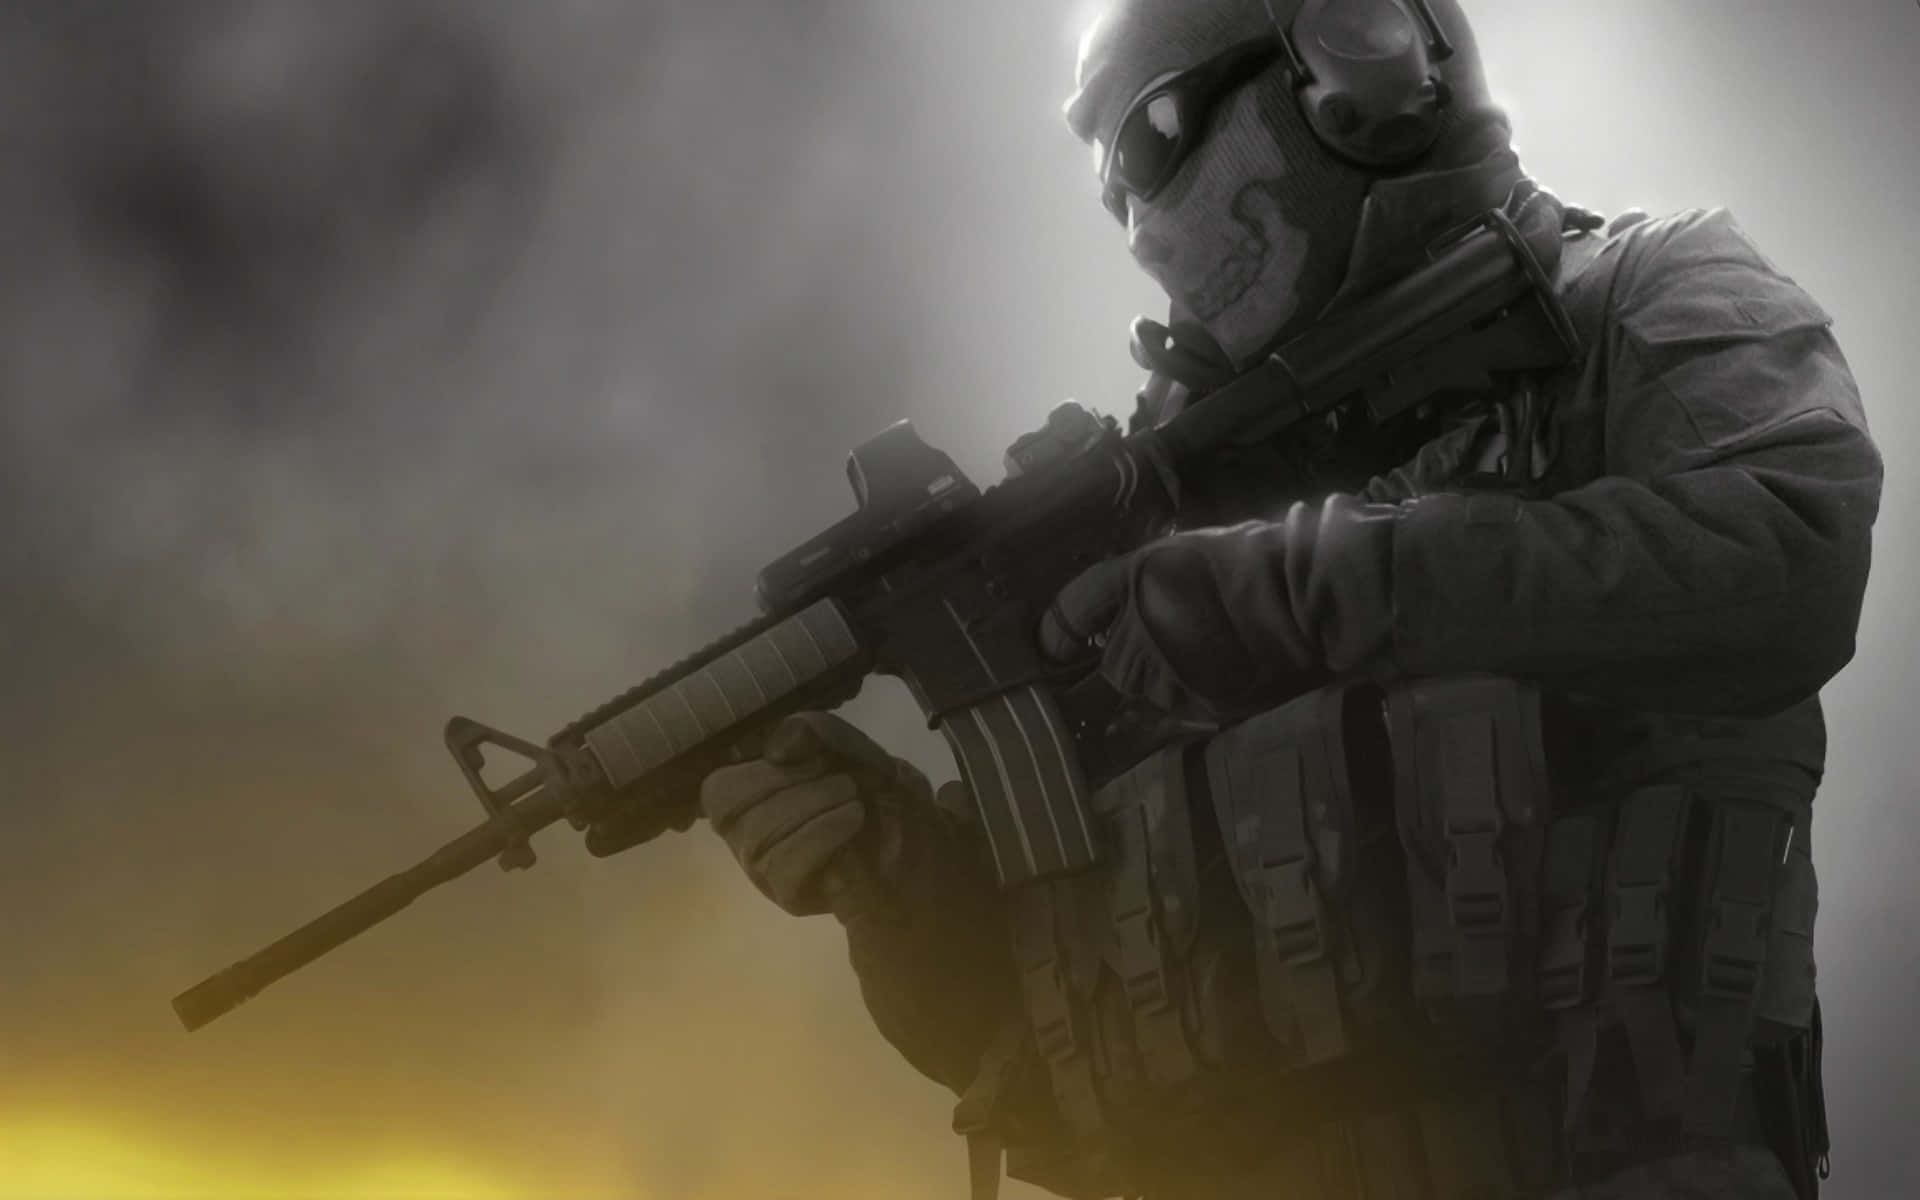 Ghost M W2 Iconic Soldier Stance Wallpaper